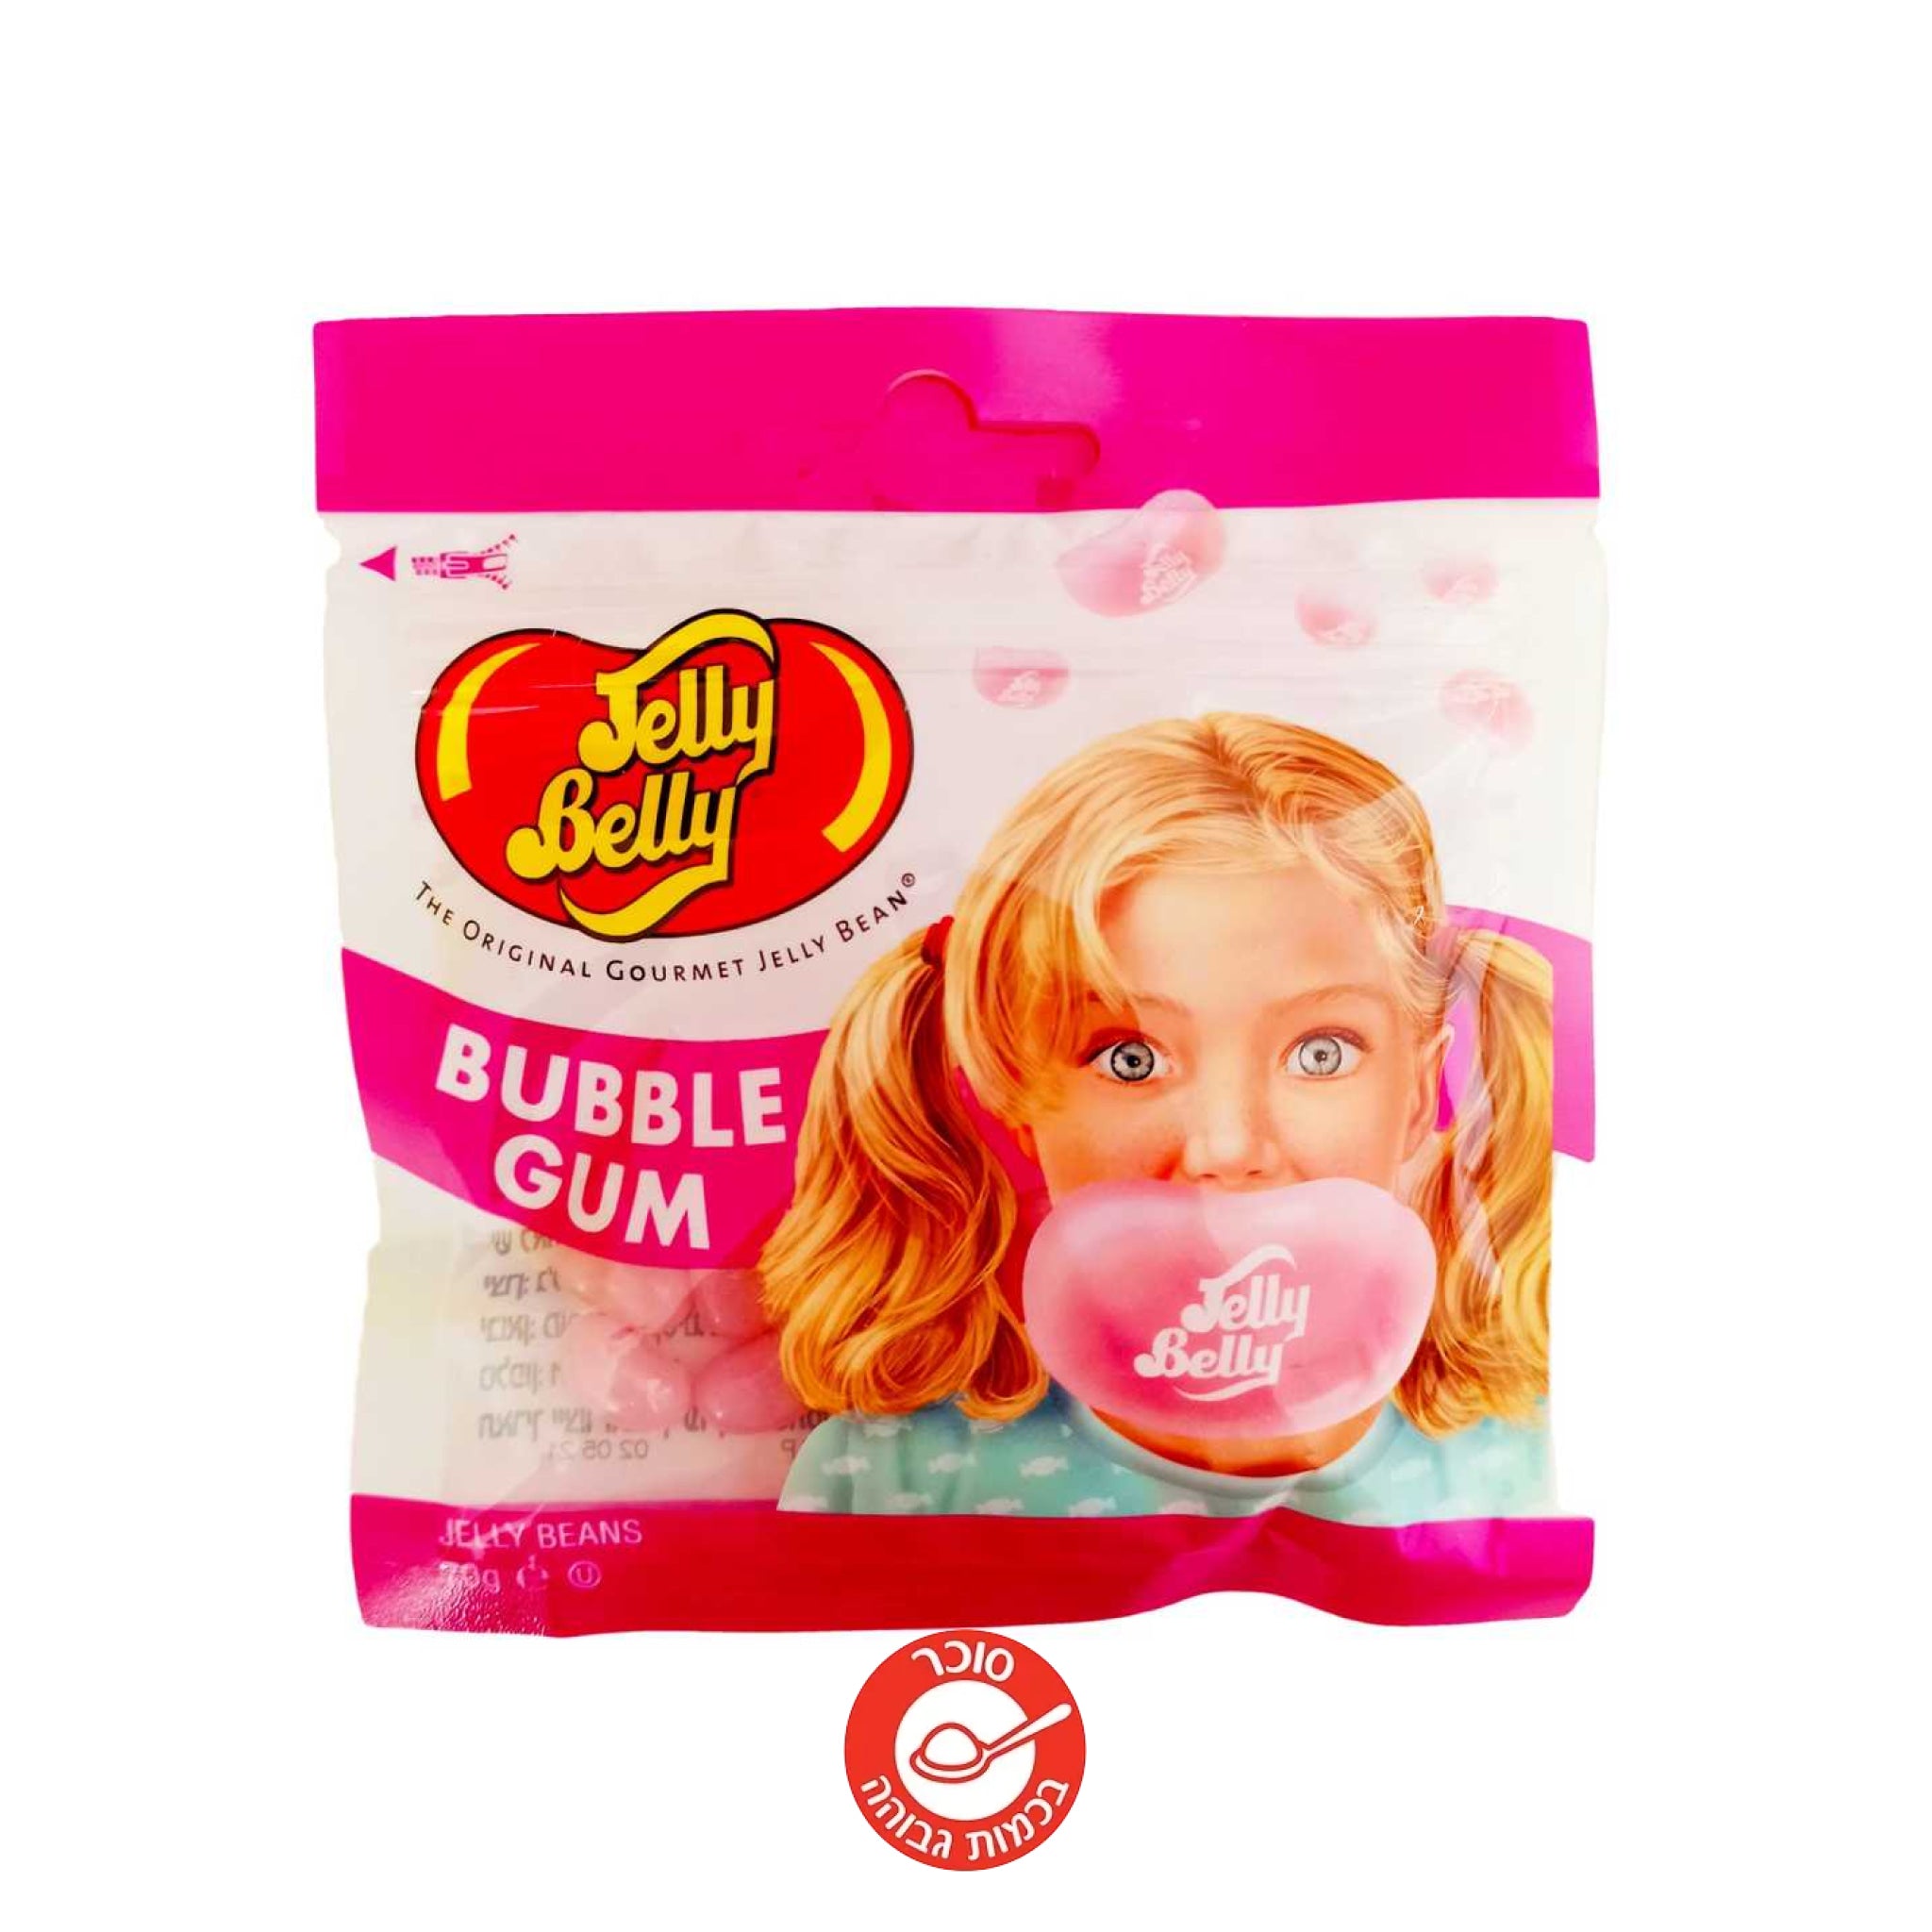 Jelly Belly Bubble Gum ג'לי בלי מסטיק - טעימים